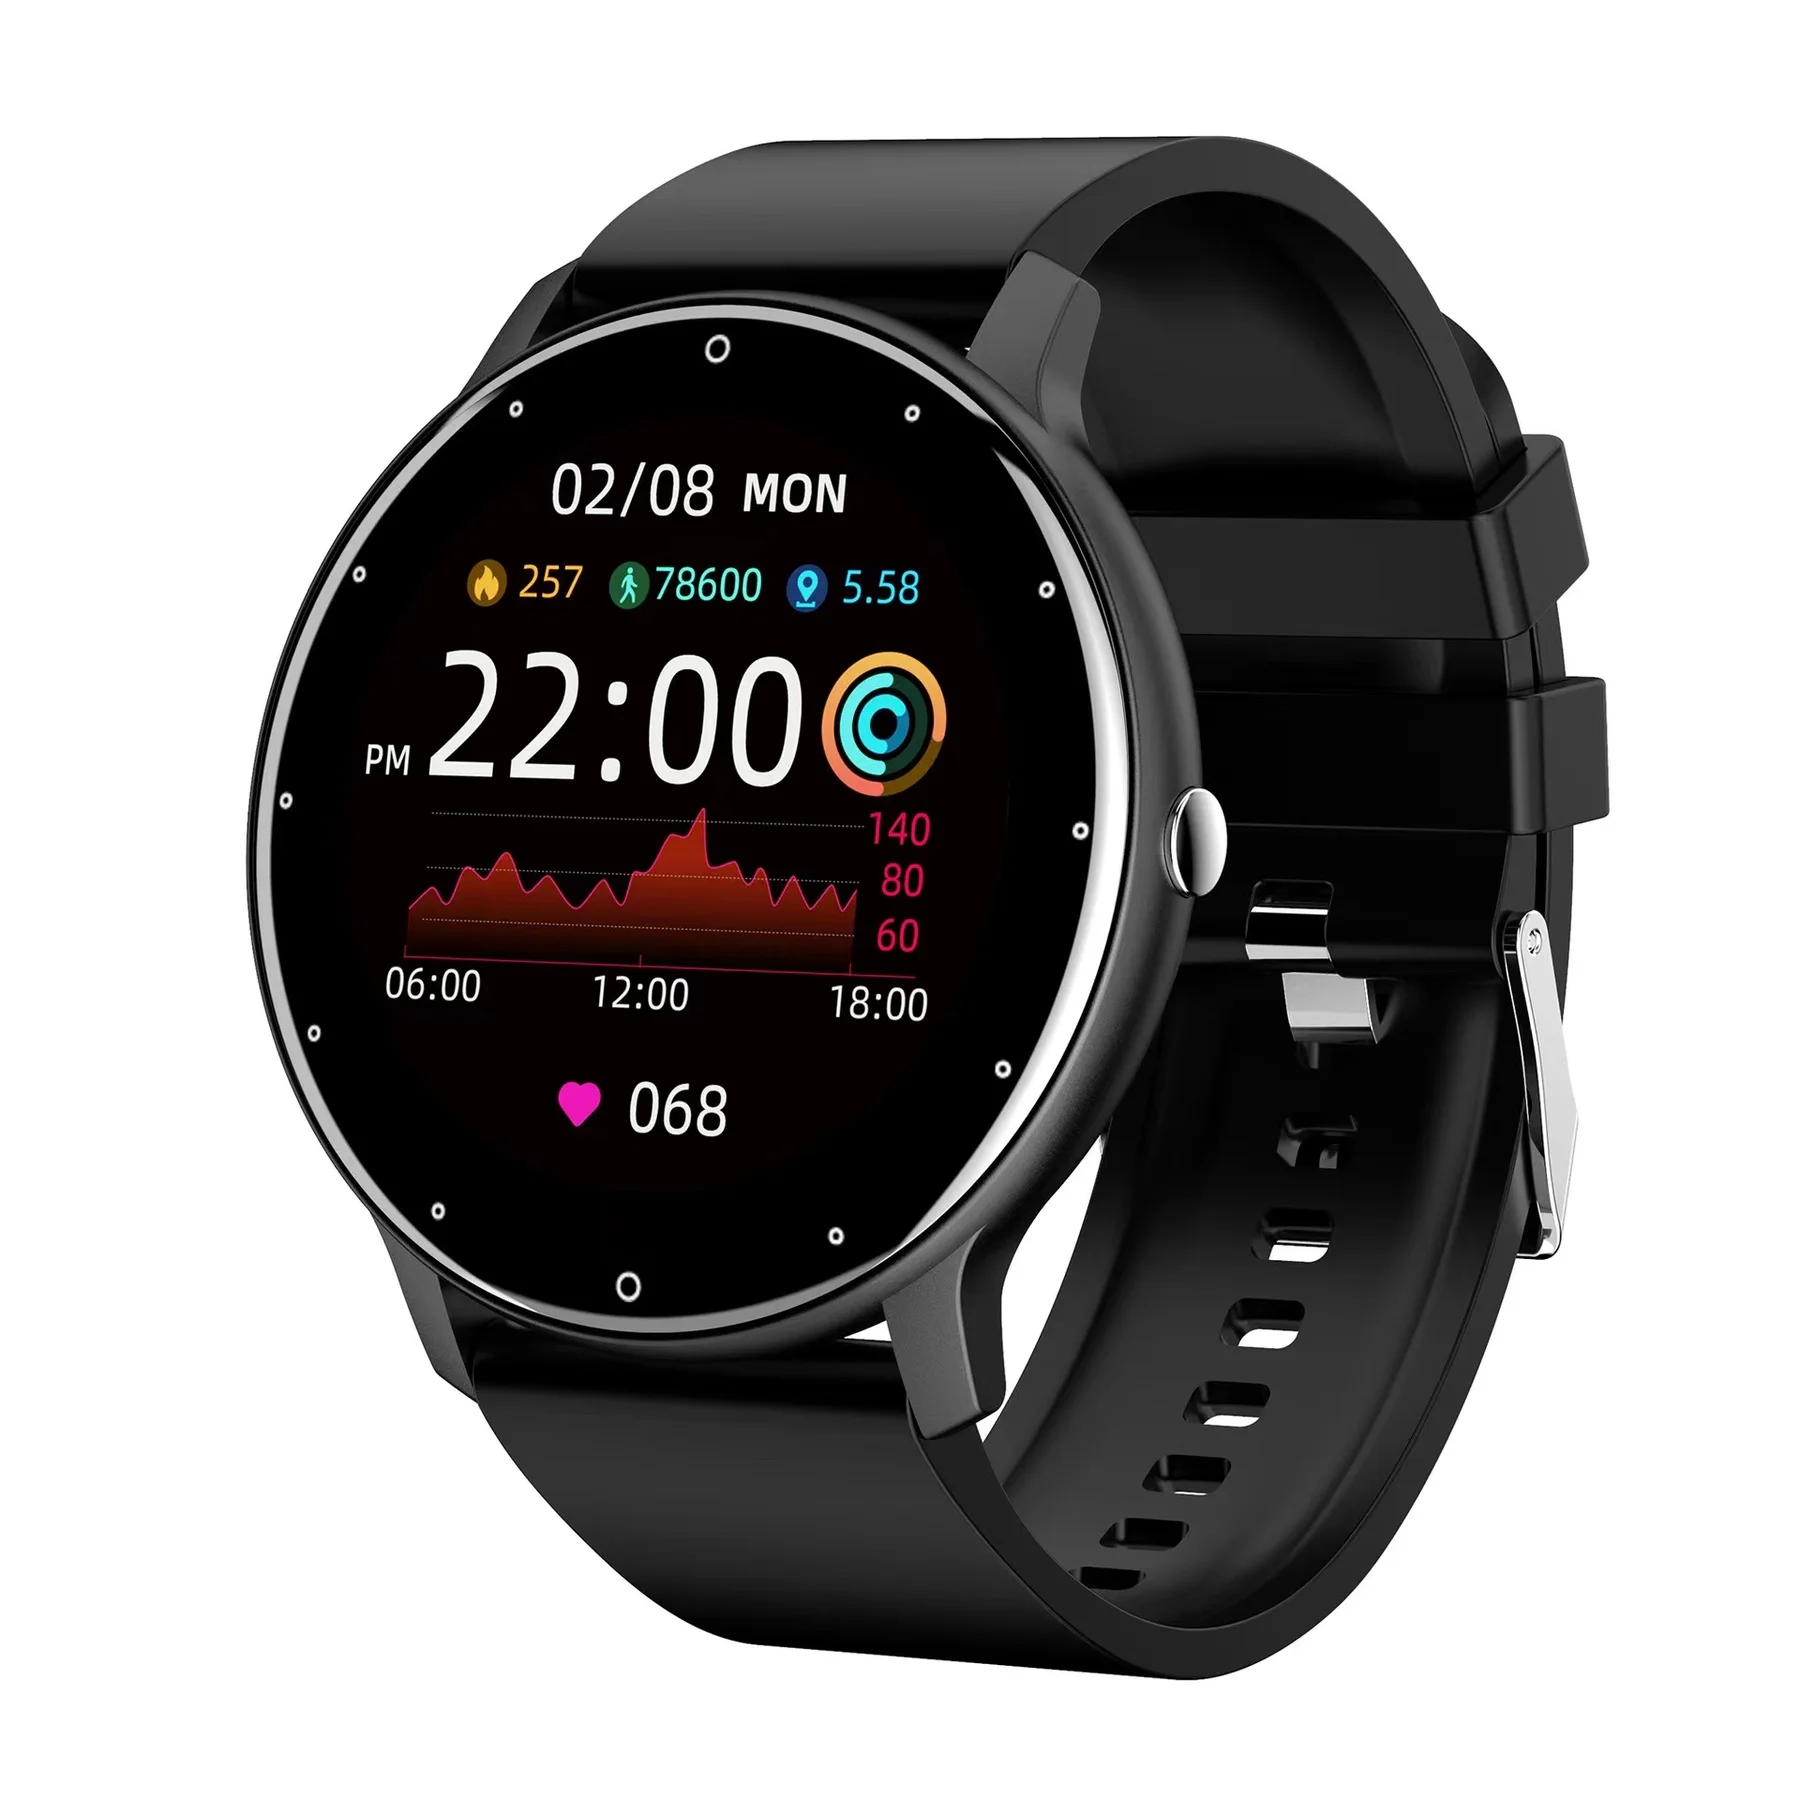 

full touch screen smart watch ip67 waterproof sports bracelet weather forecast heart rate blood pressure message reminder watch